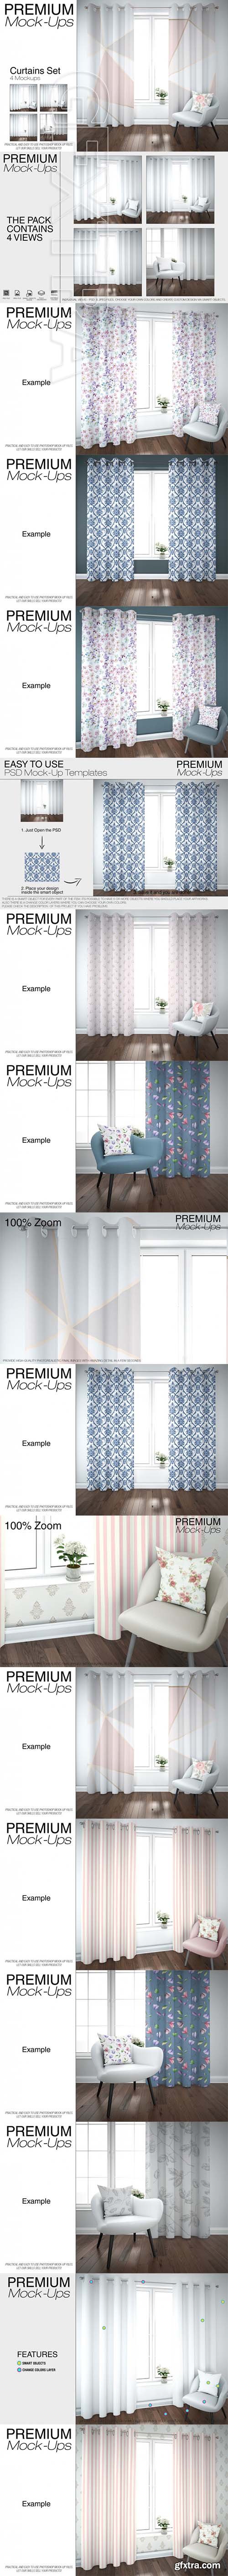 Curtains & Pillow Mockup Pack